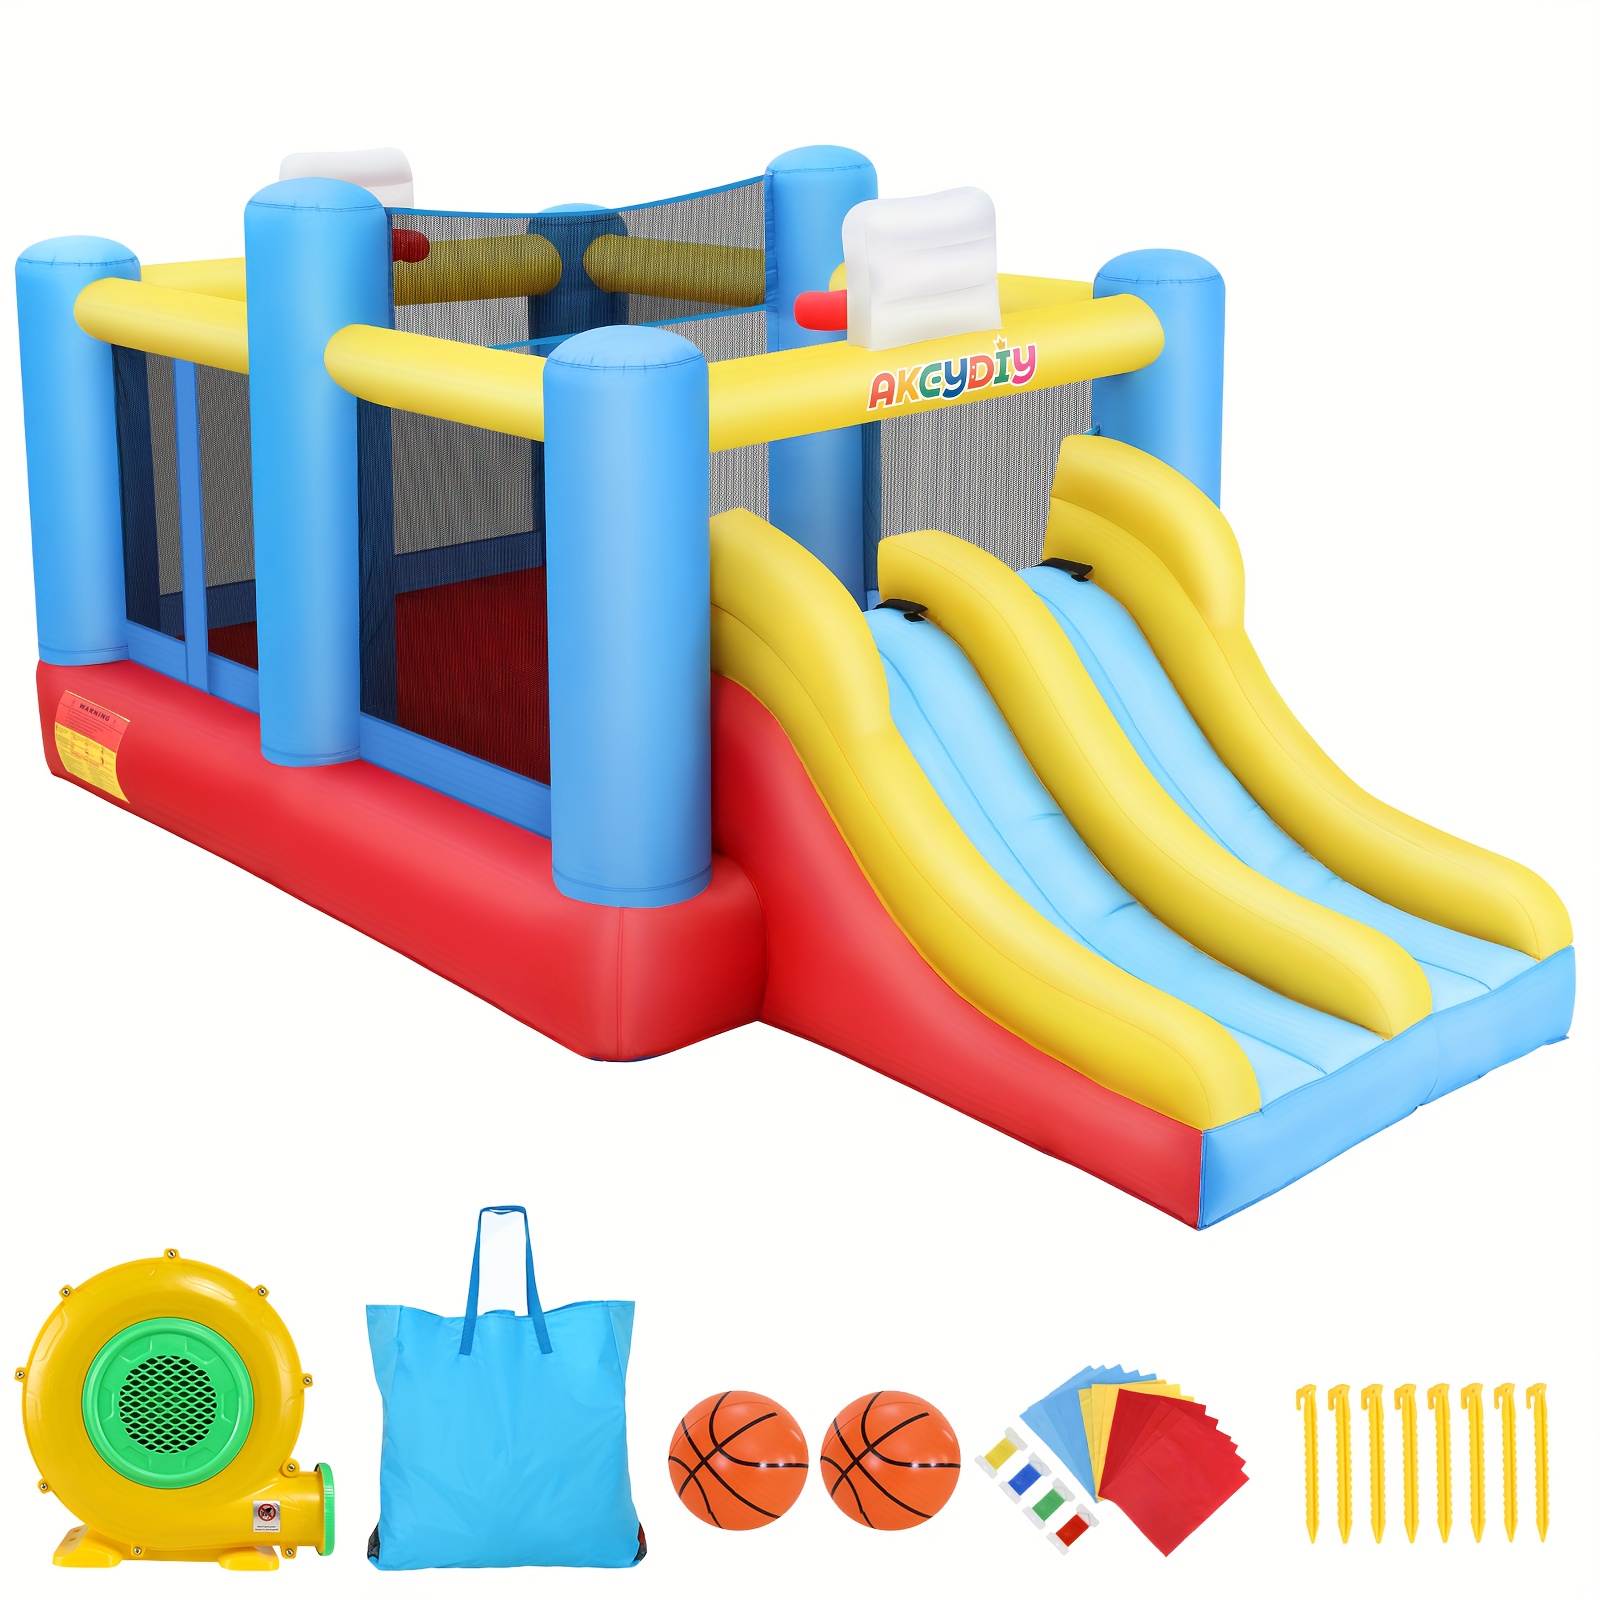 

Inflatable Bouncy Castle With Dual Slide, Climbing Wall, Dual Slides, Basketball Hoop, Volleyball Net, Sports , Easy To Set Up & Inflate With Included Air Blower & Carrying Bag